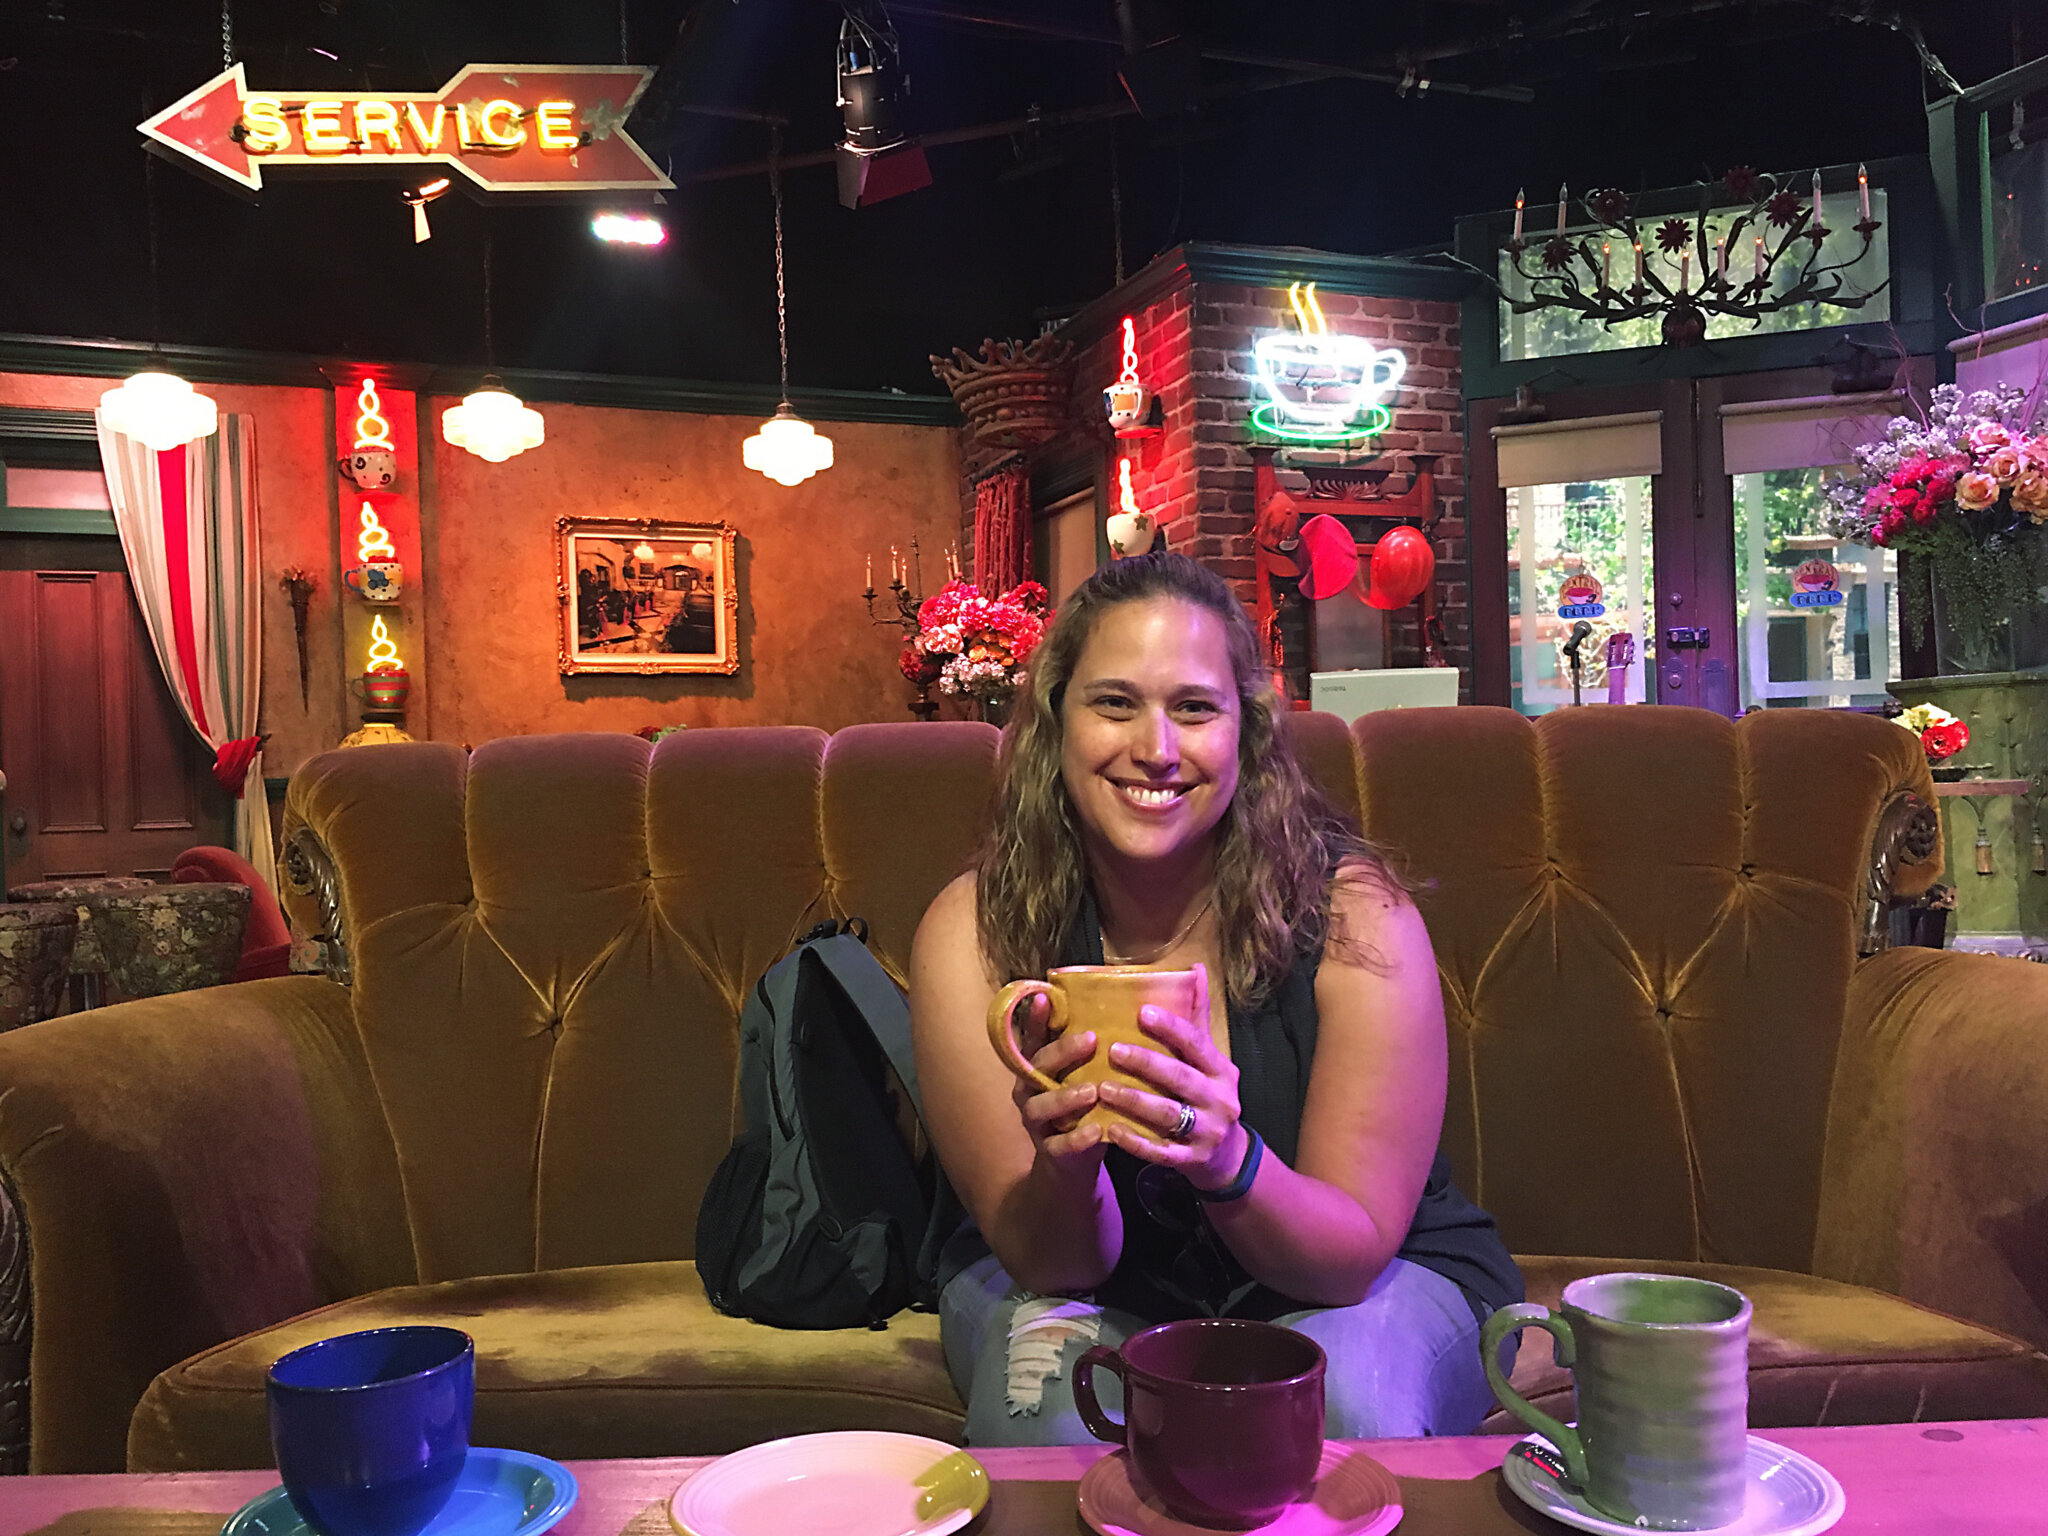 Michelle on her sabbatical enjoying her 'endless summer' with a trip to Central Perk from the TV series 'Friends' at Warner Bros Studios